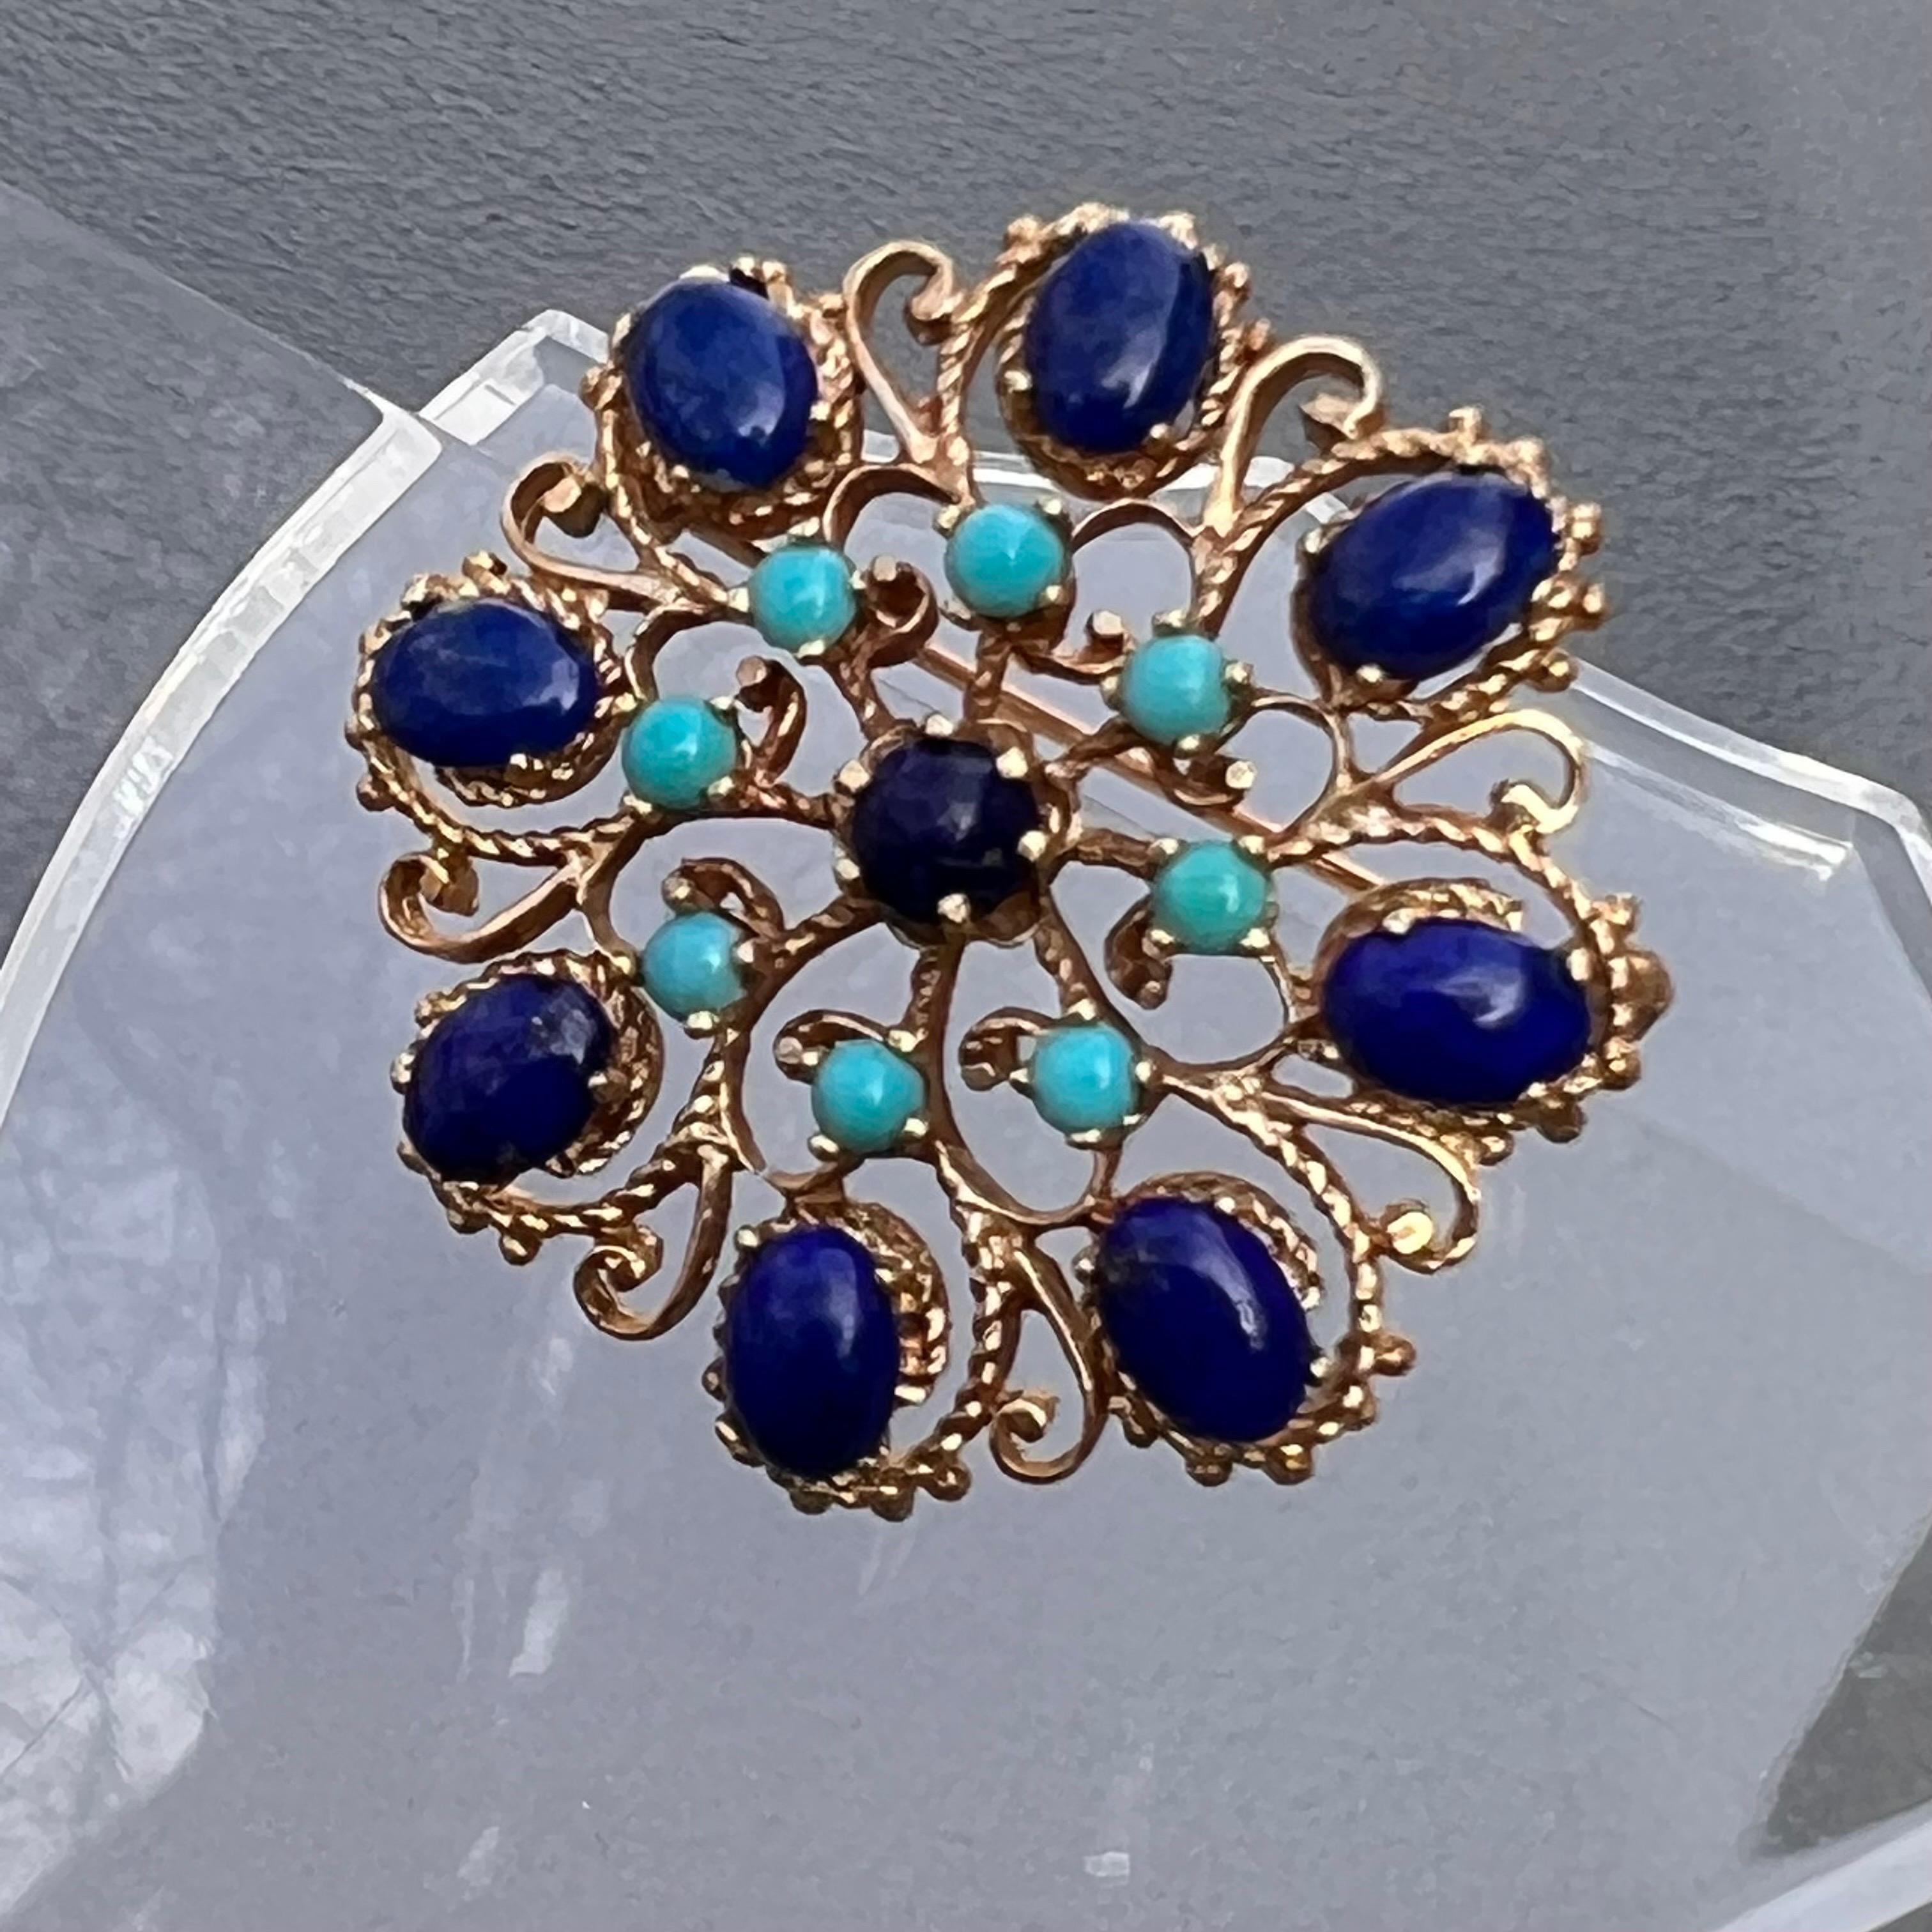 14 Karat Gold Turquoise and Lapis Victorian  Revival Brooch For Sale 1